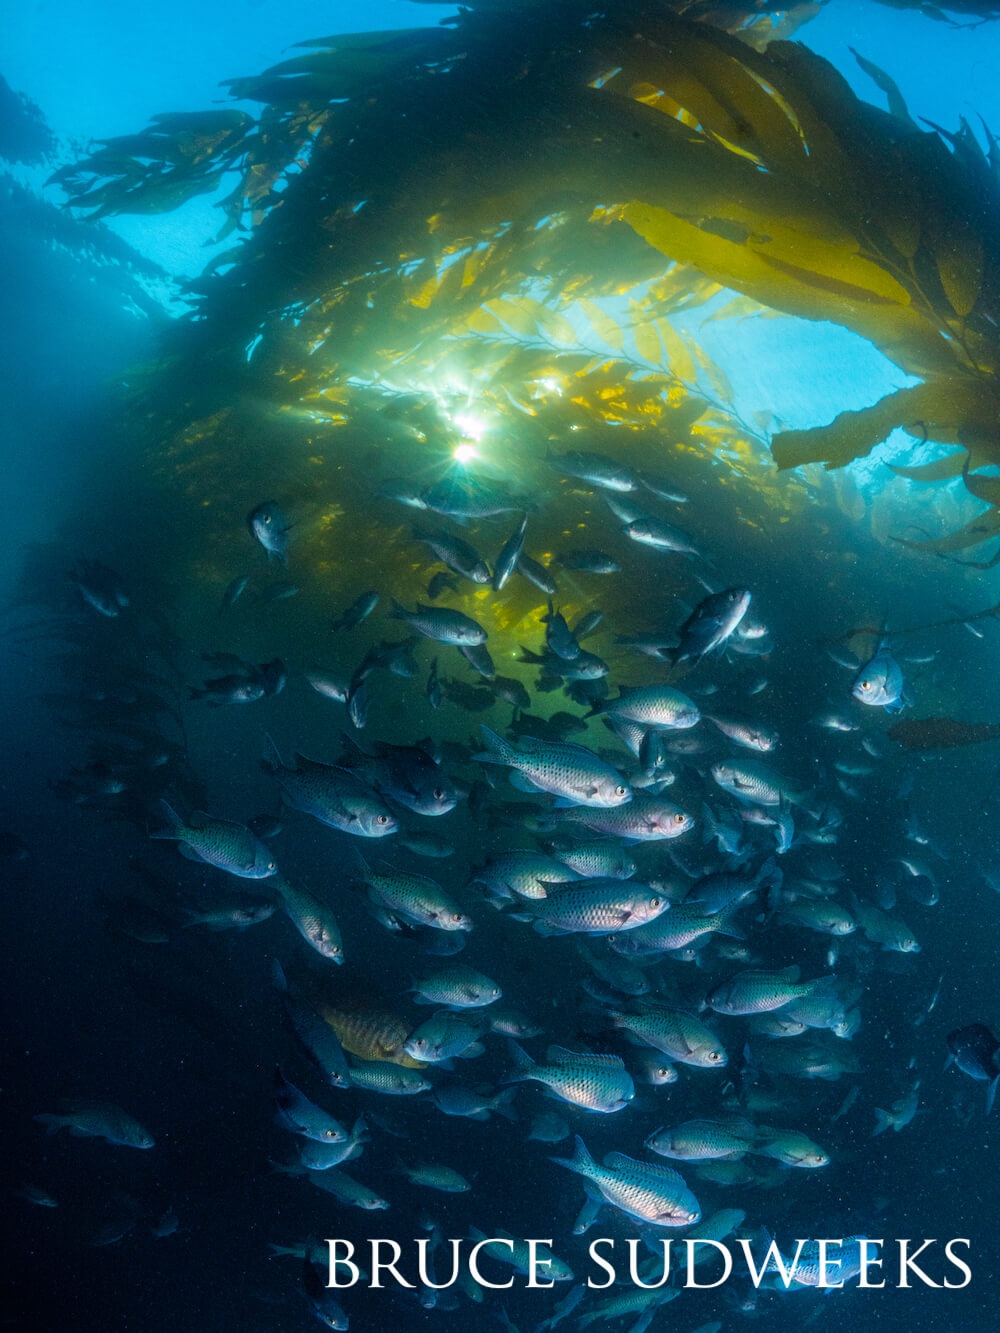 School of fish swimming in a kelp forest near the top of the ocean.